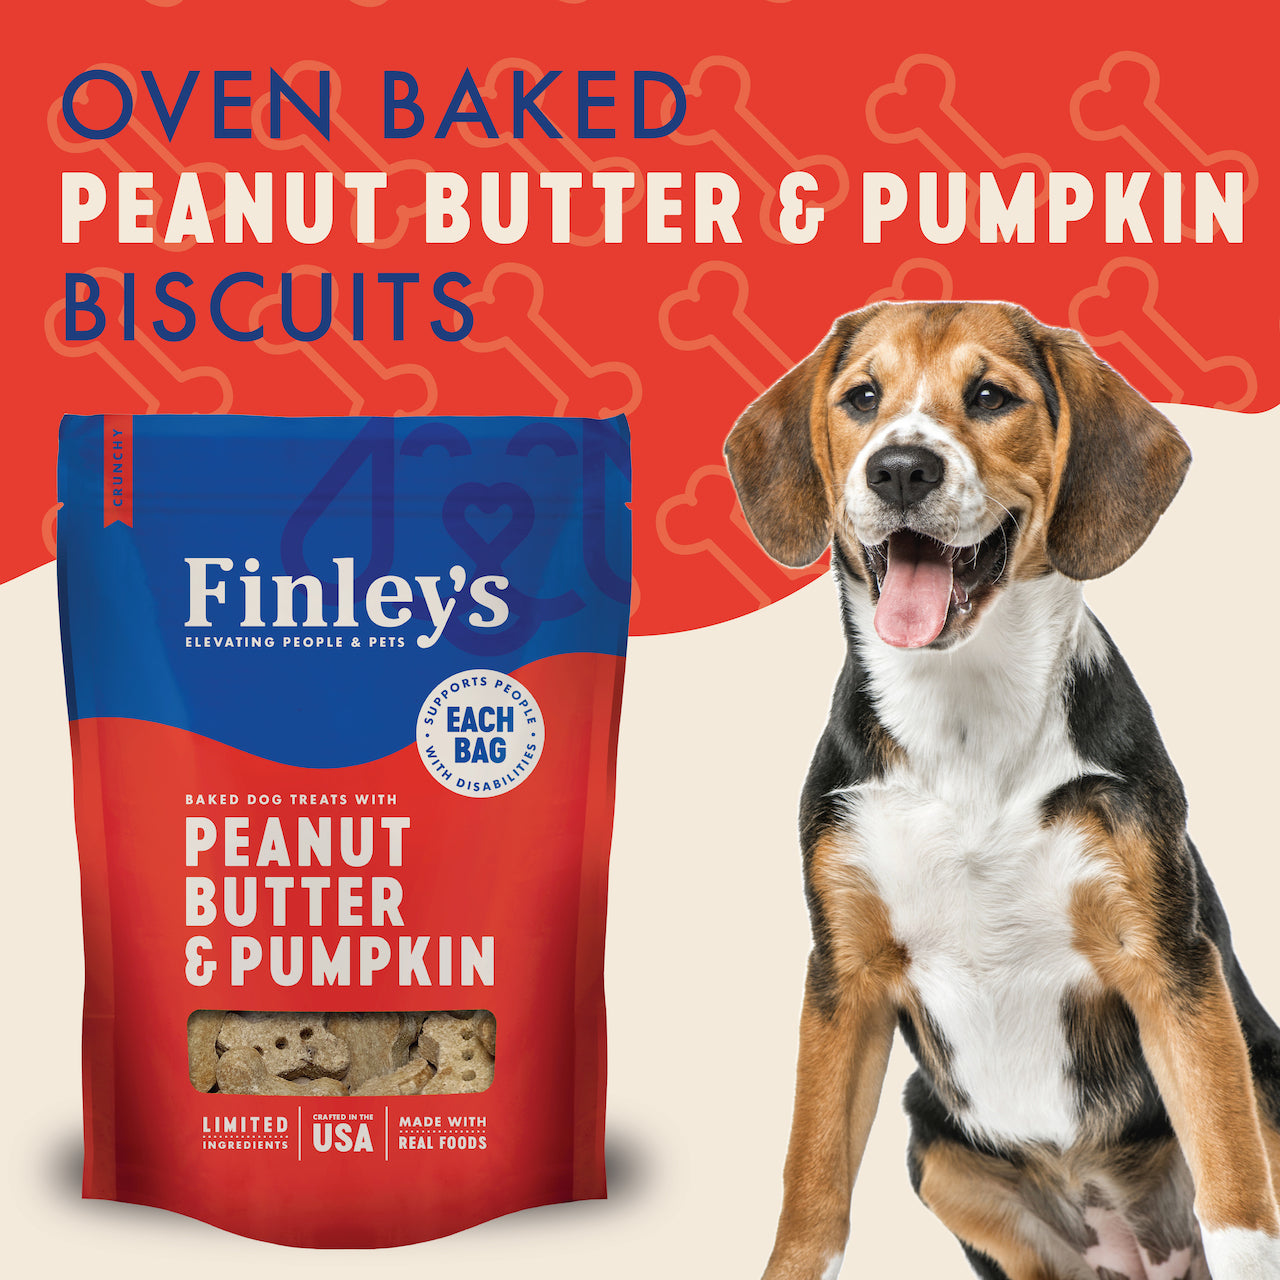 Peanut Butter & Blueberry Dog Treats in a pouch